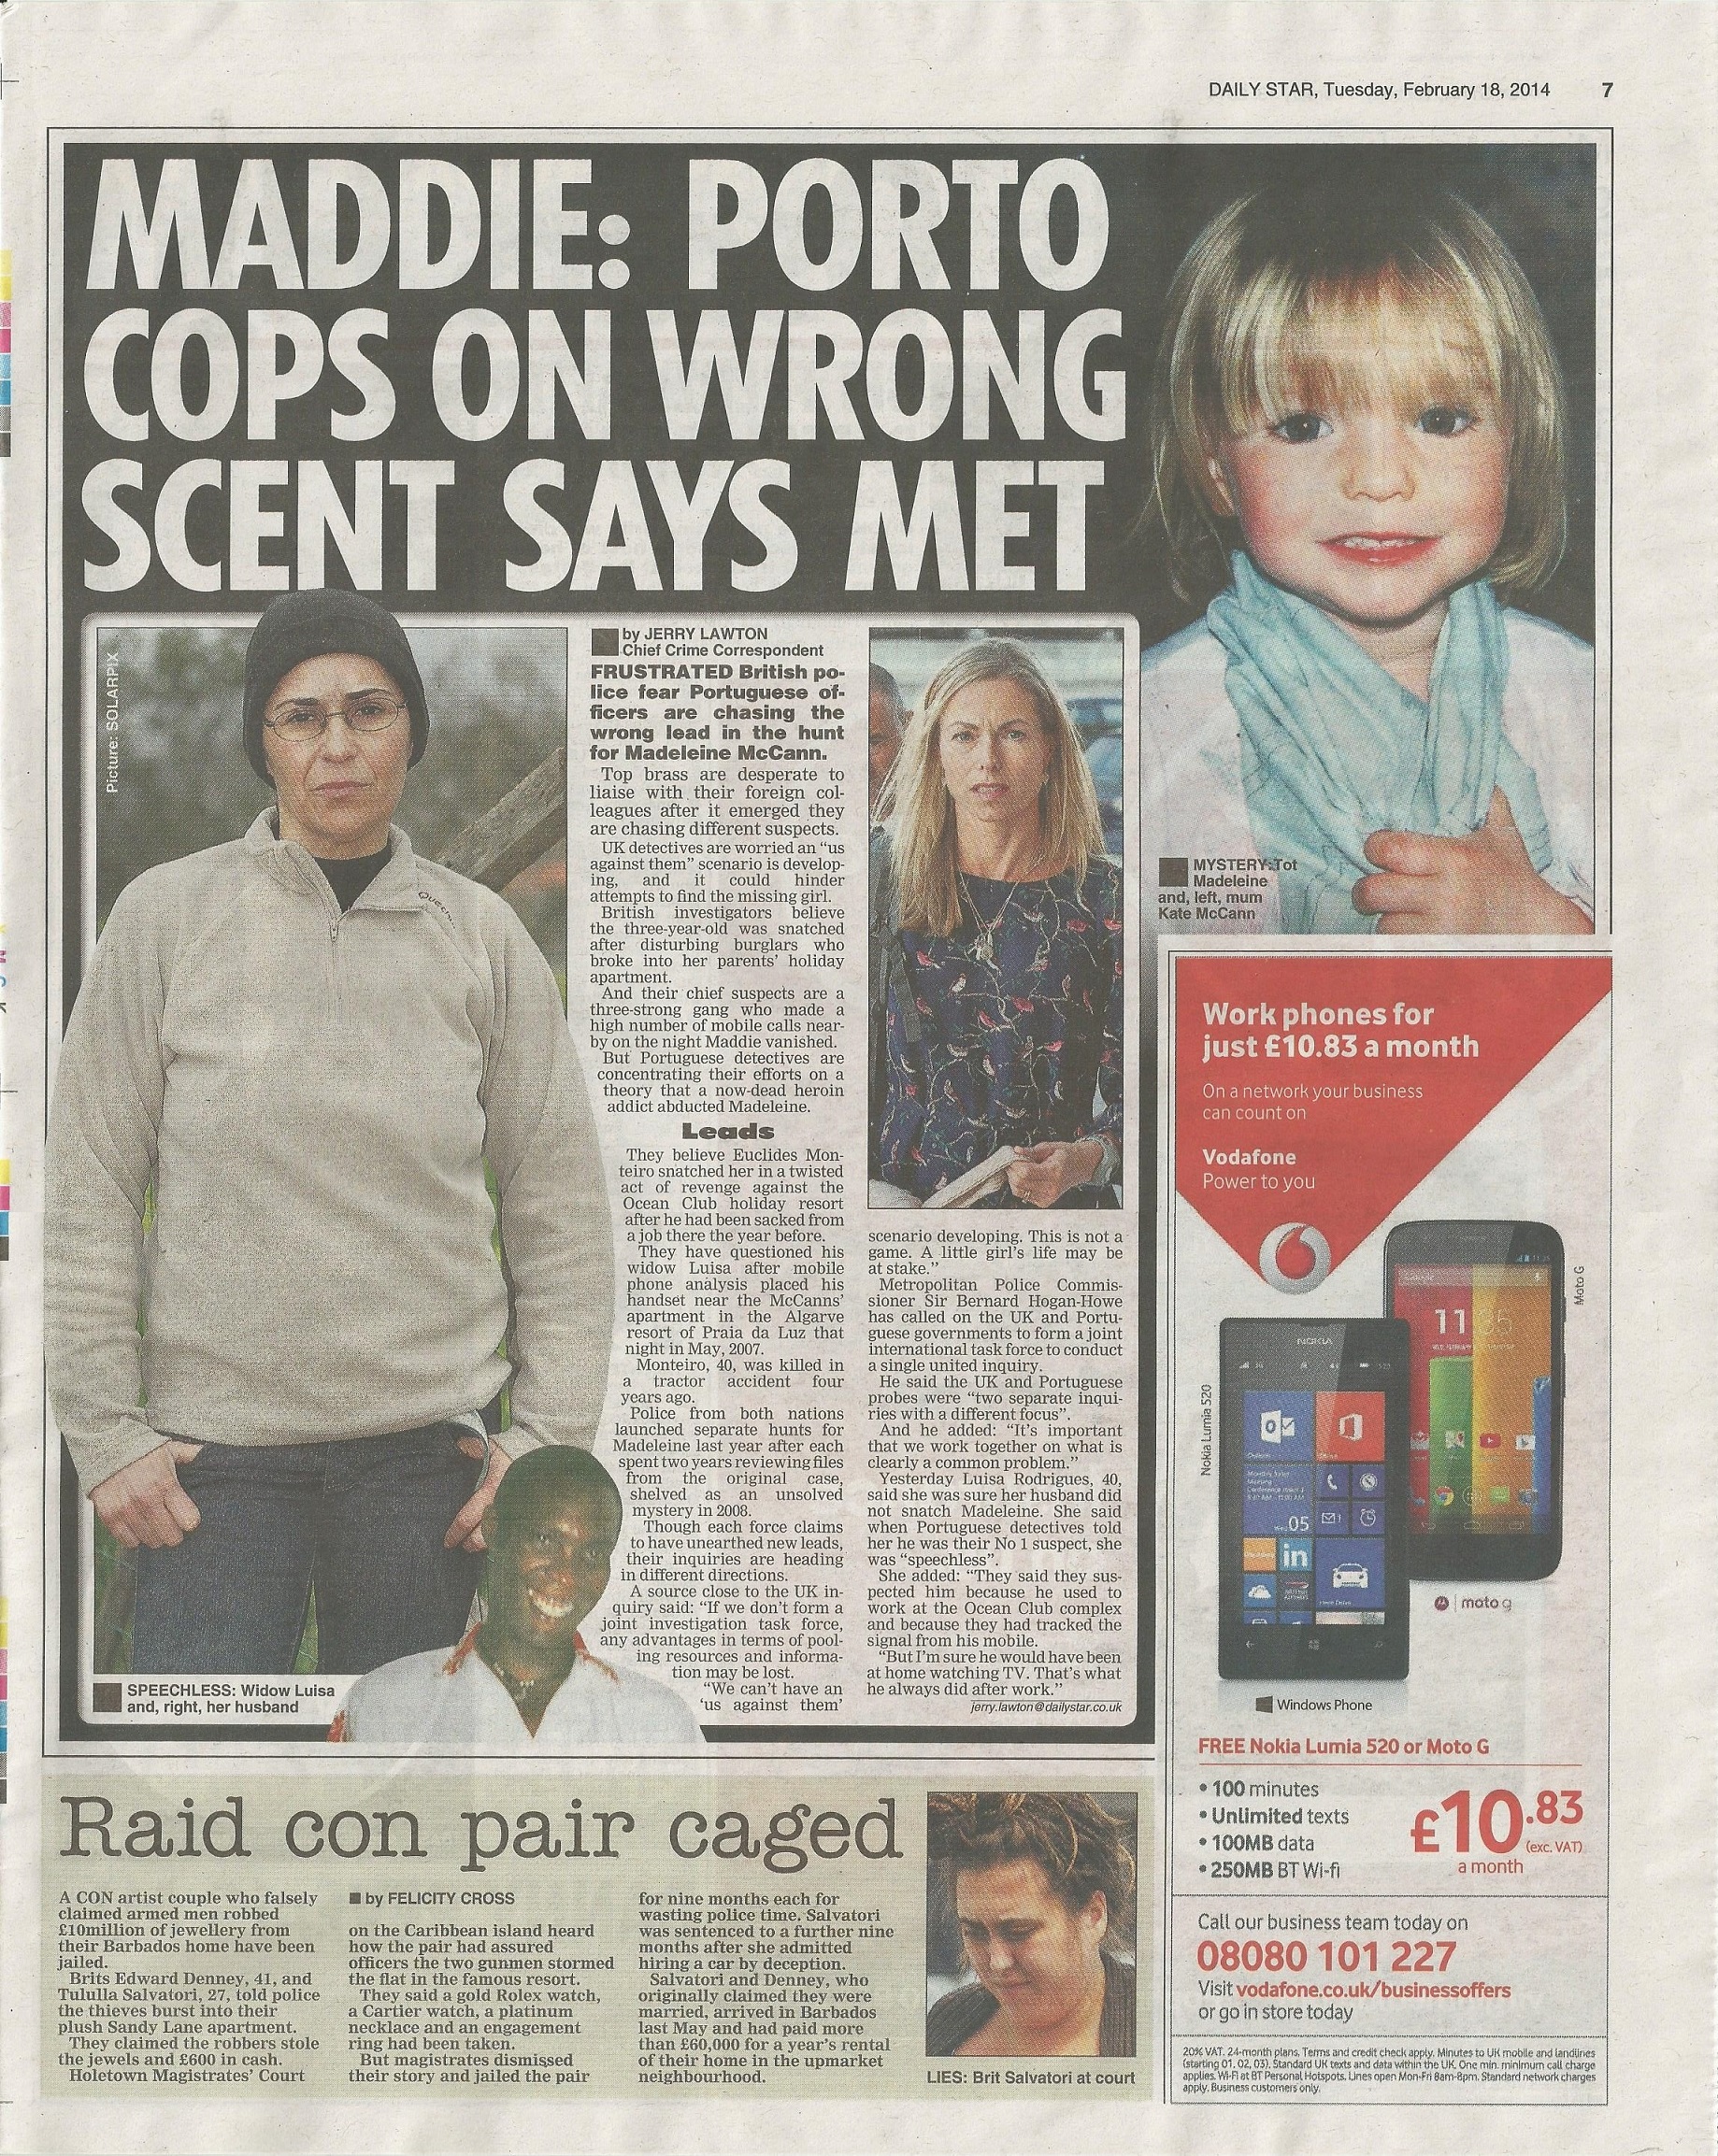 Daily Star, paper edition, page 7: 'Maddie: Porto cops on wrong scent says Met', 18 February 2014